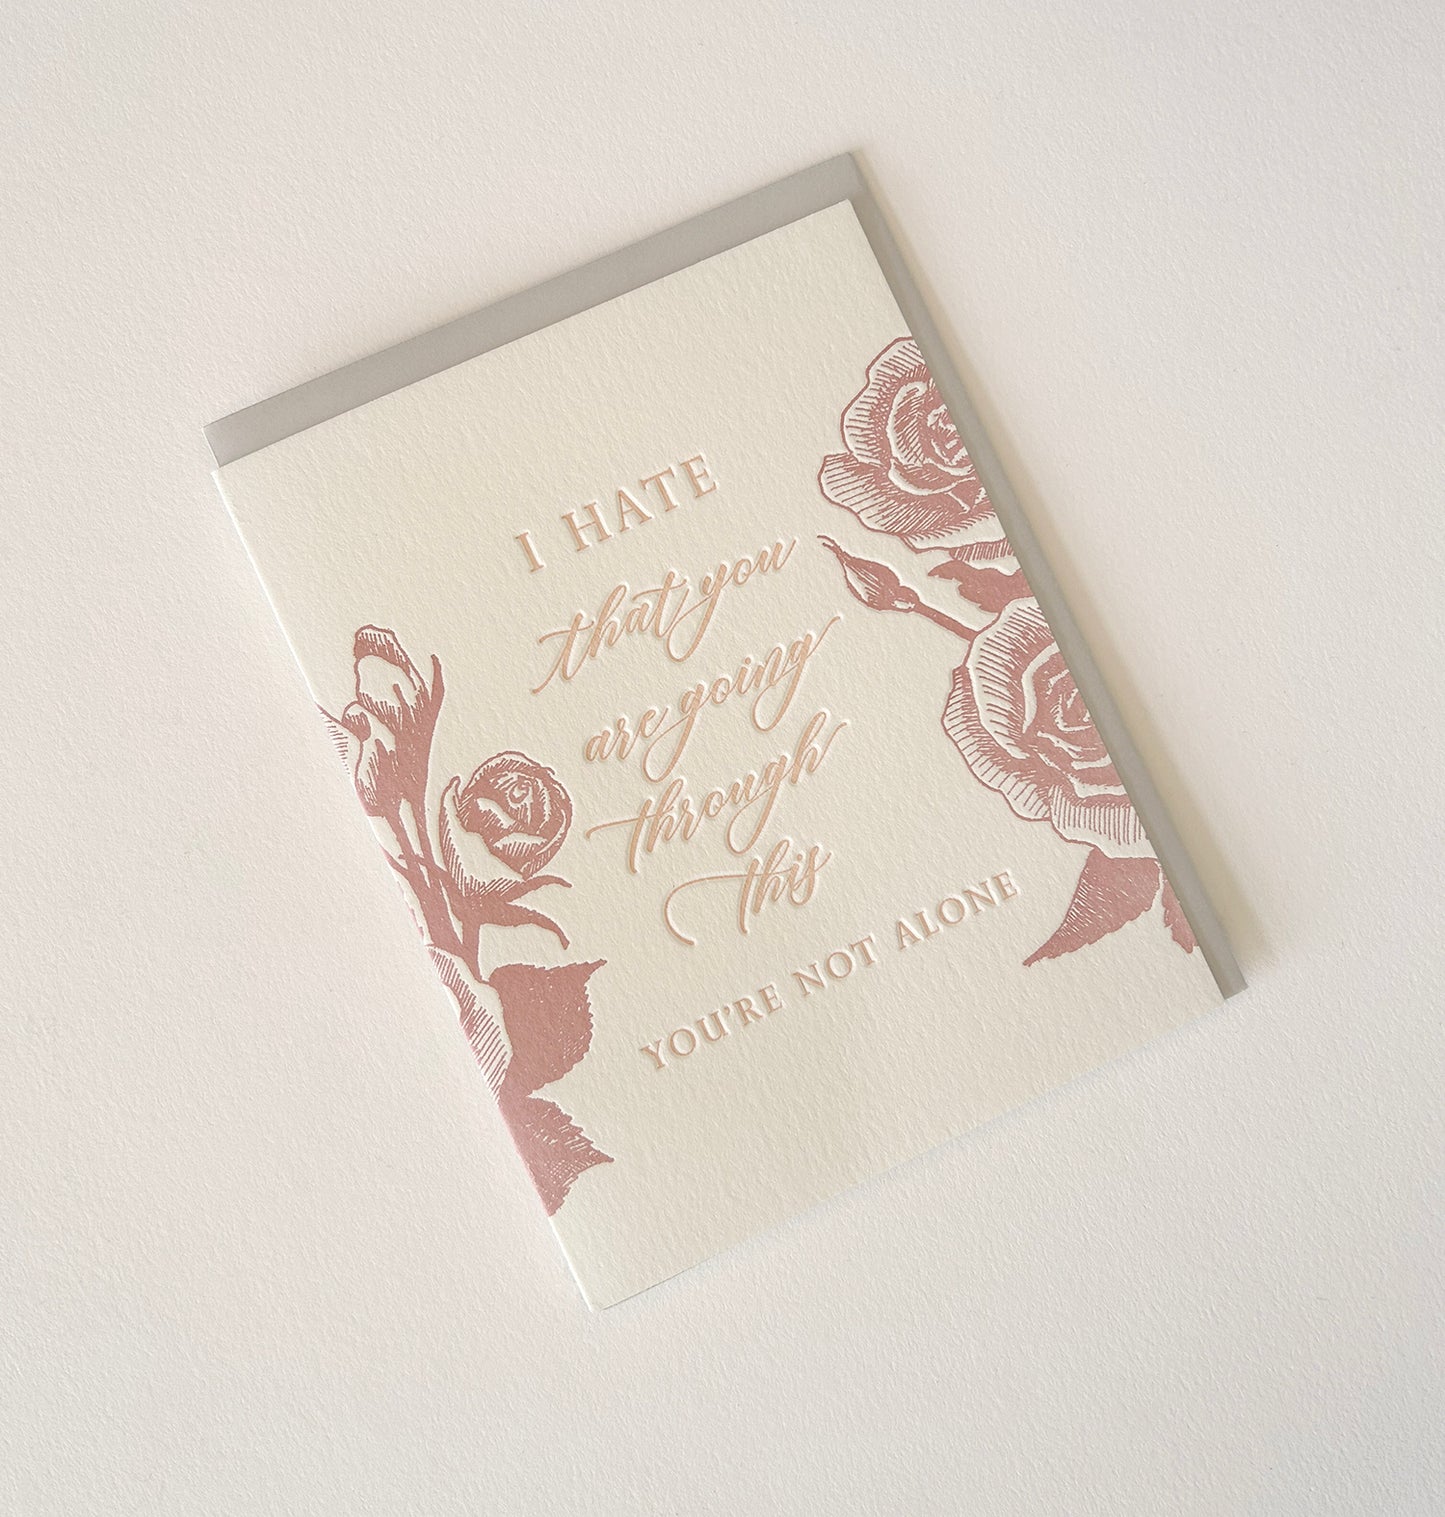 I Hate That You're Going Through This Letterpress Greeting Card